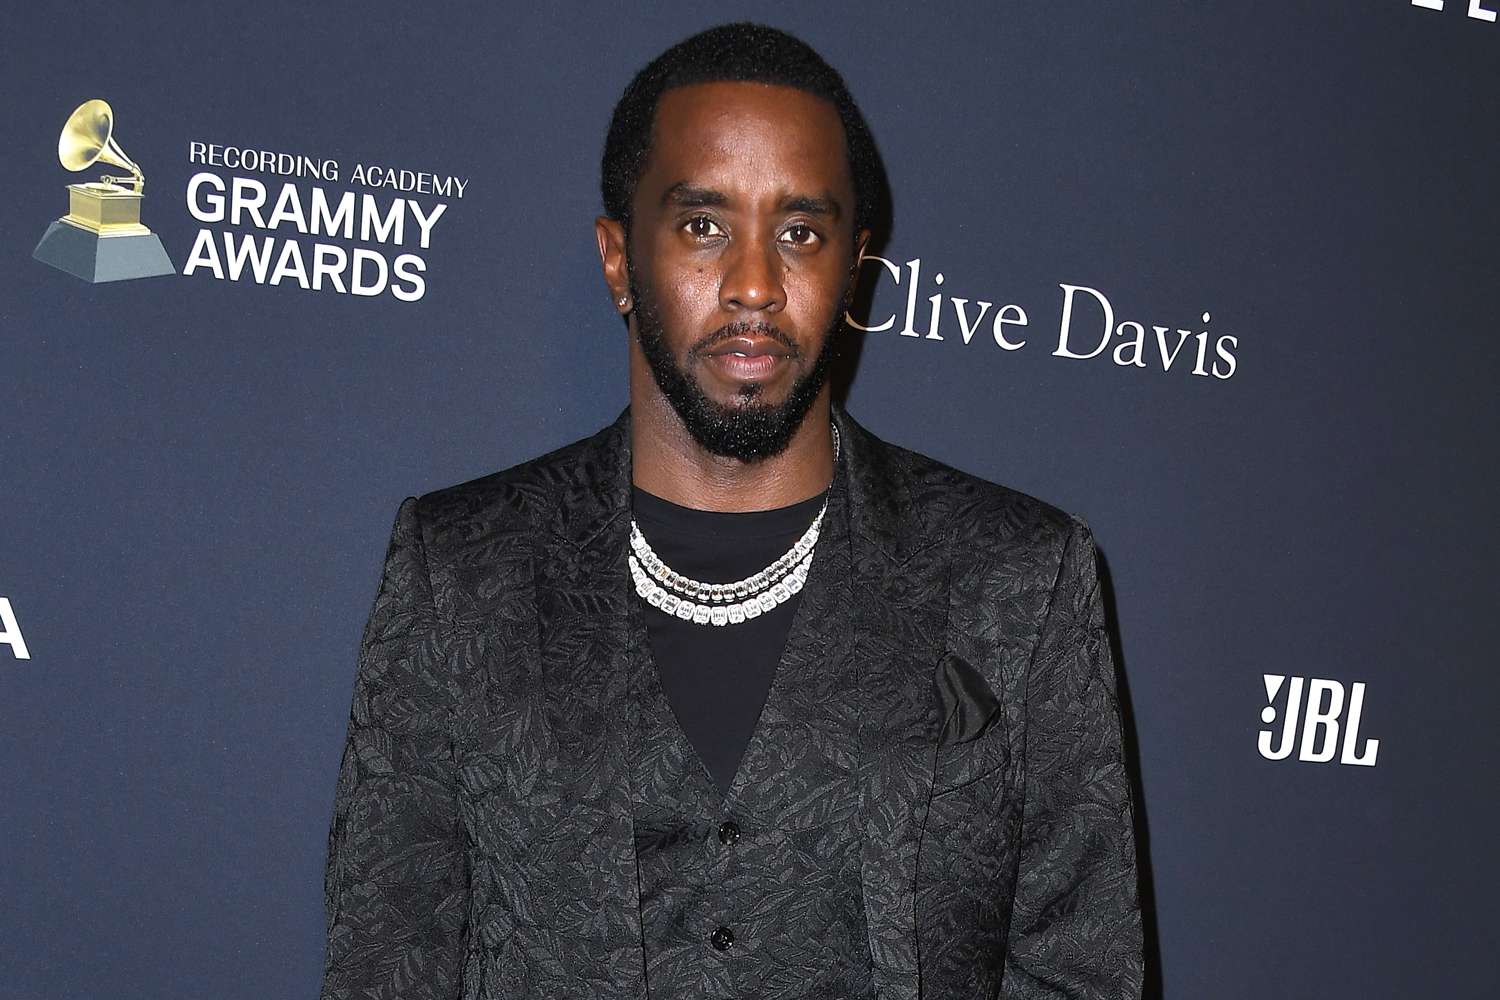 Sean “Diddy” Combs Sued For Sexually Assaulting Male Music Producer